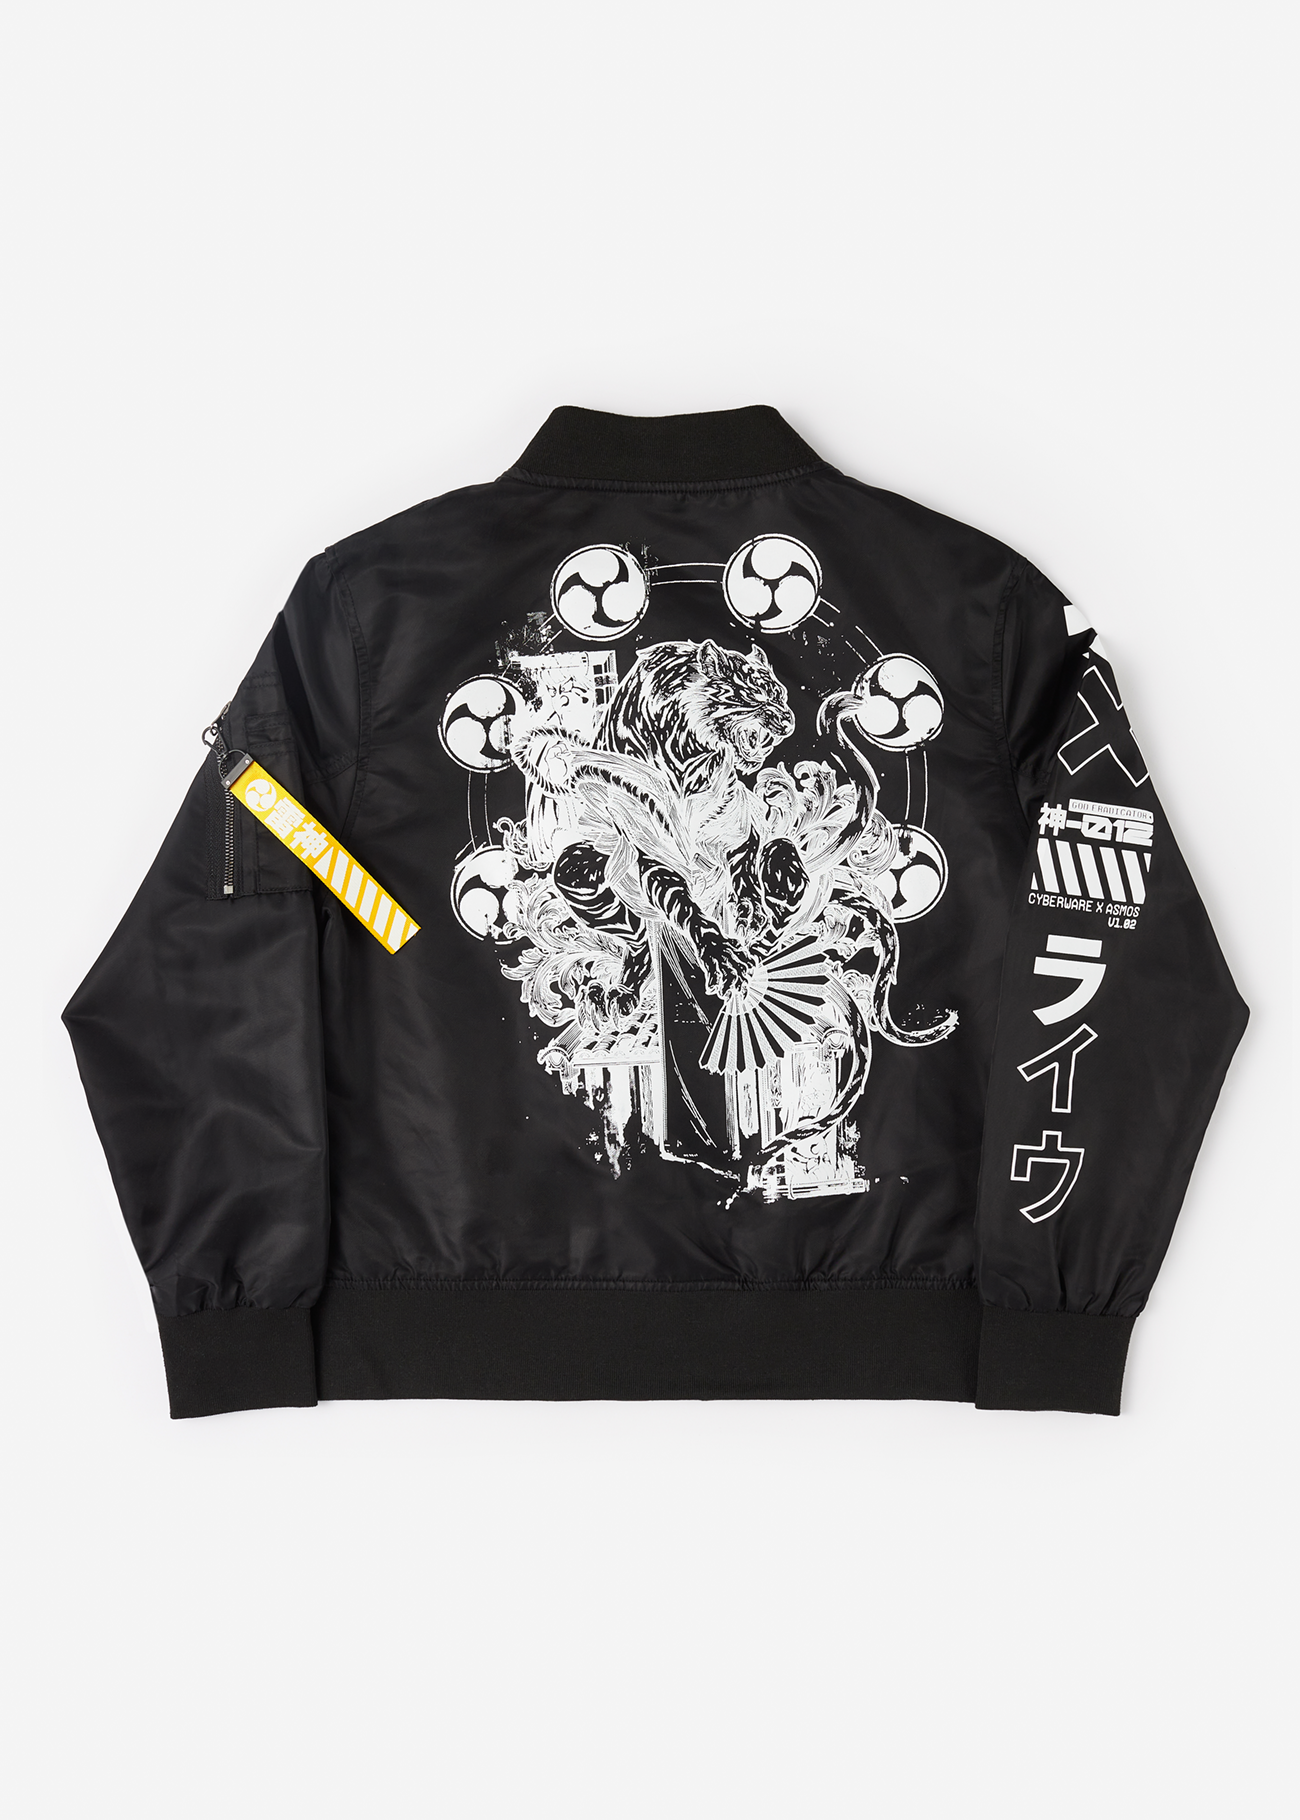 Photo of the back of a Black Bomber Jacket featuring a large screen print Raijin, a Japanese Mythology Figure converted to an anime inspired bomber jacket